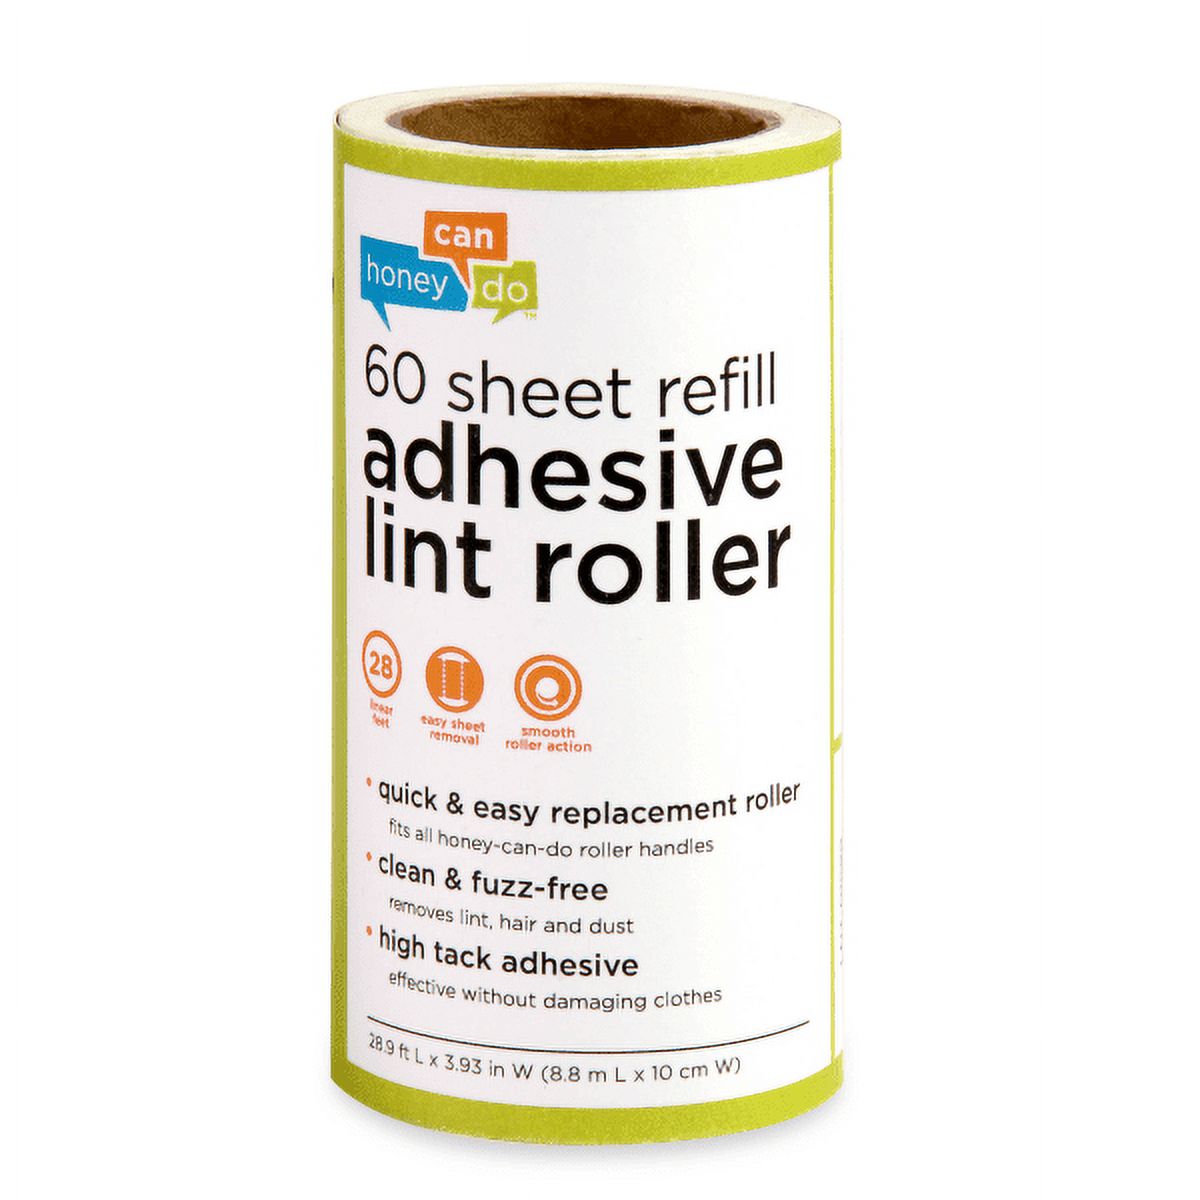 Honey-Can-Do Adhesive Lint Roller Refills, 60 Sheets Per Roll, Pack Of 6 Rolls - image 1 of 1